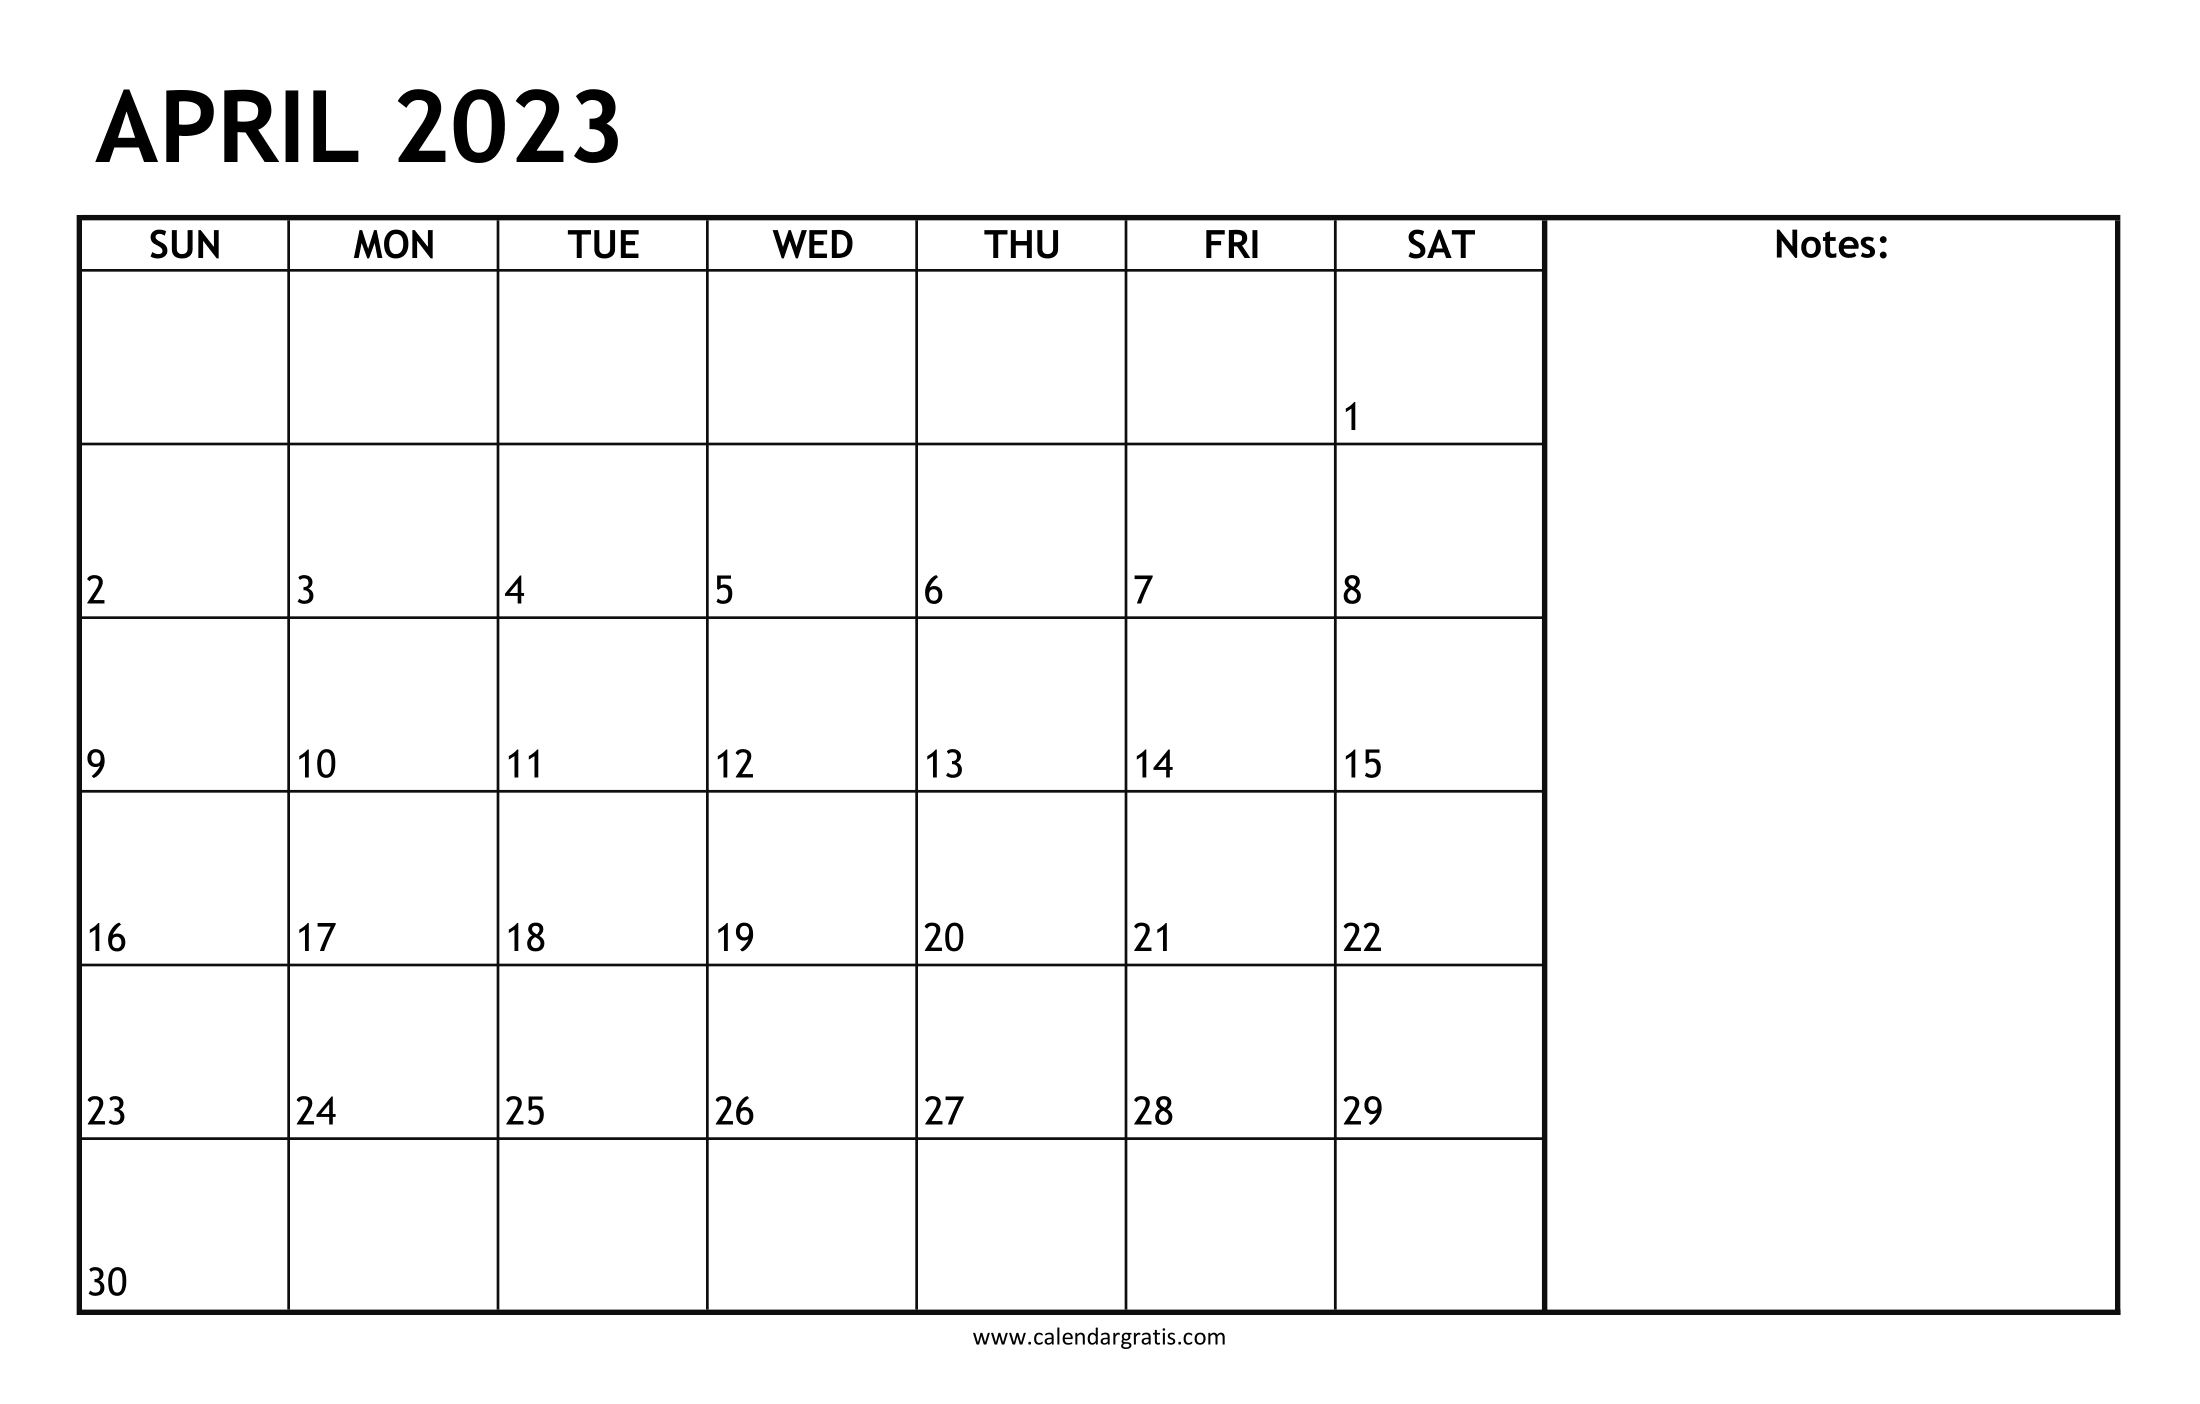 Printable April 2023 Calendar Template with Notes Section. Mark Dates for upcoming festivals, monthly appointments, meetings, birthdays, and anniversaries.